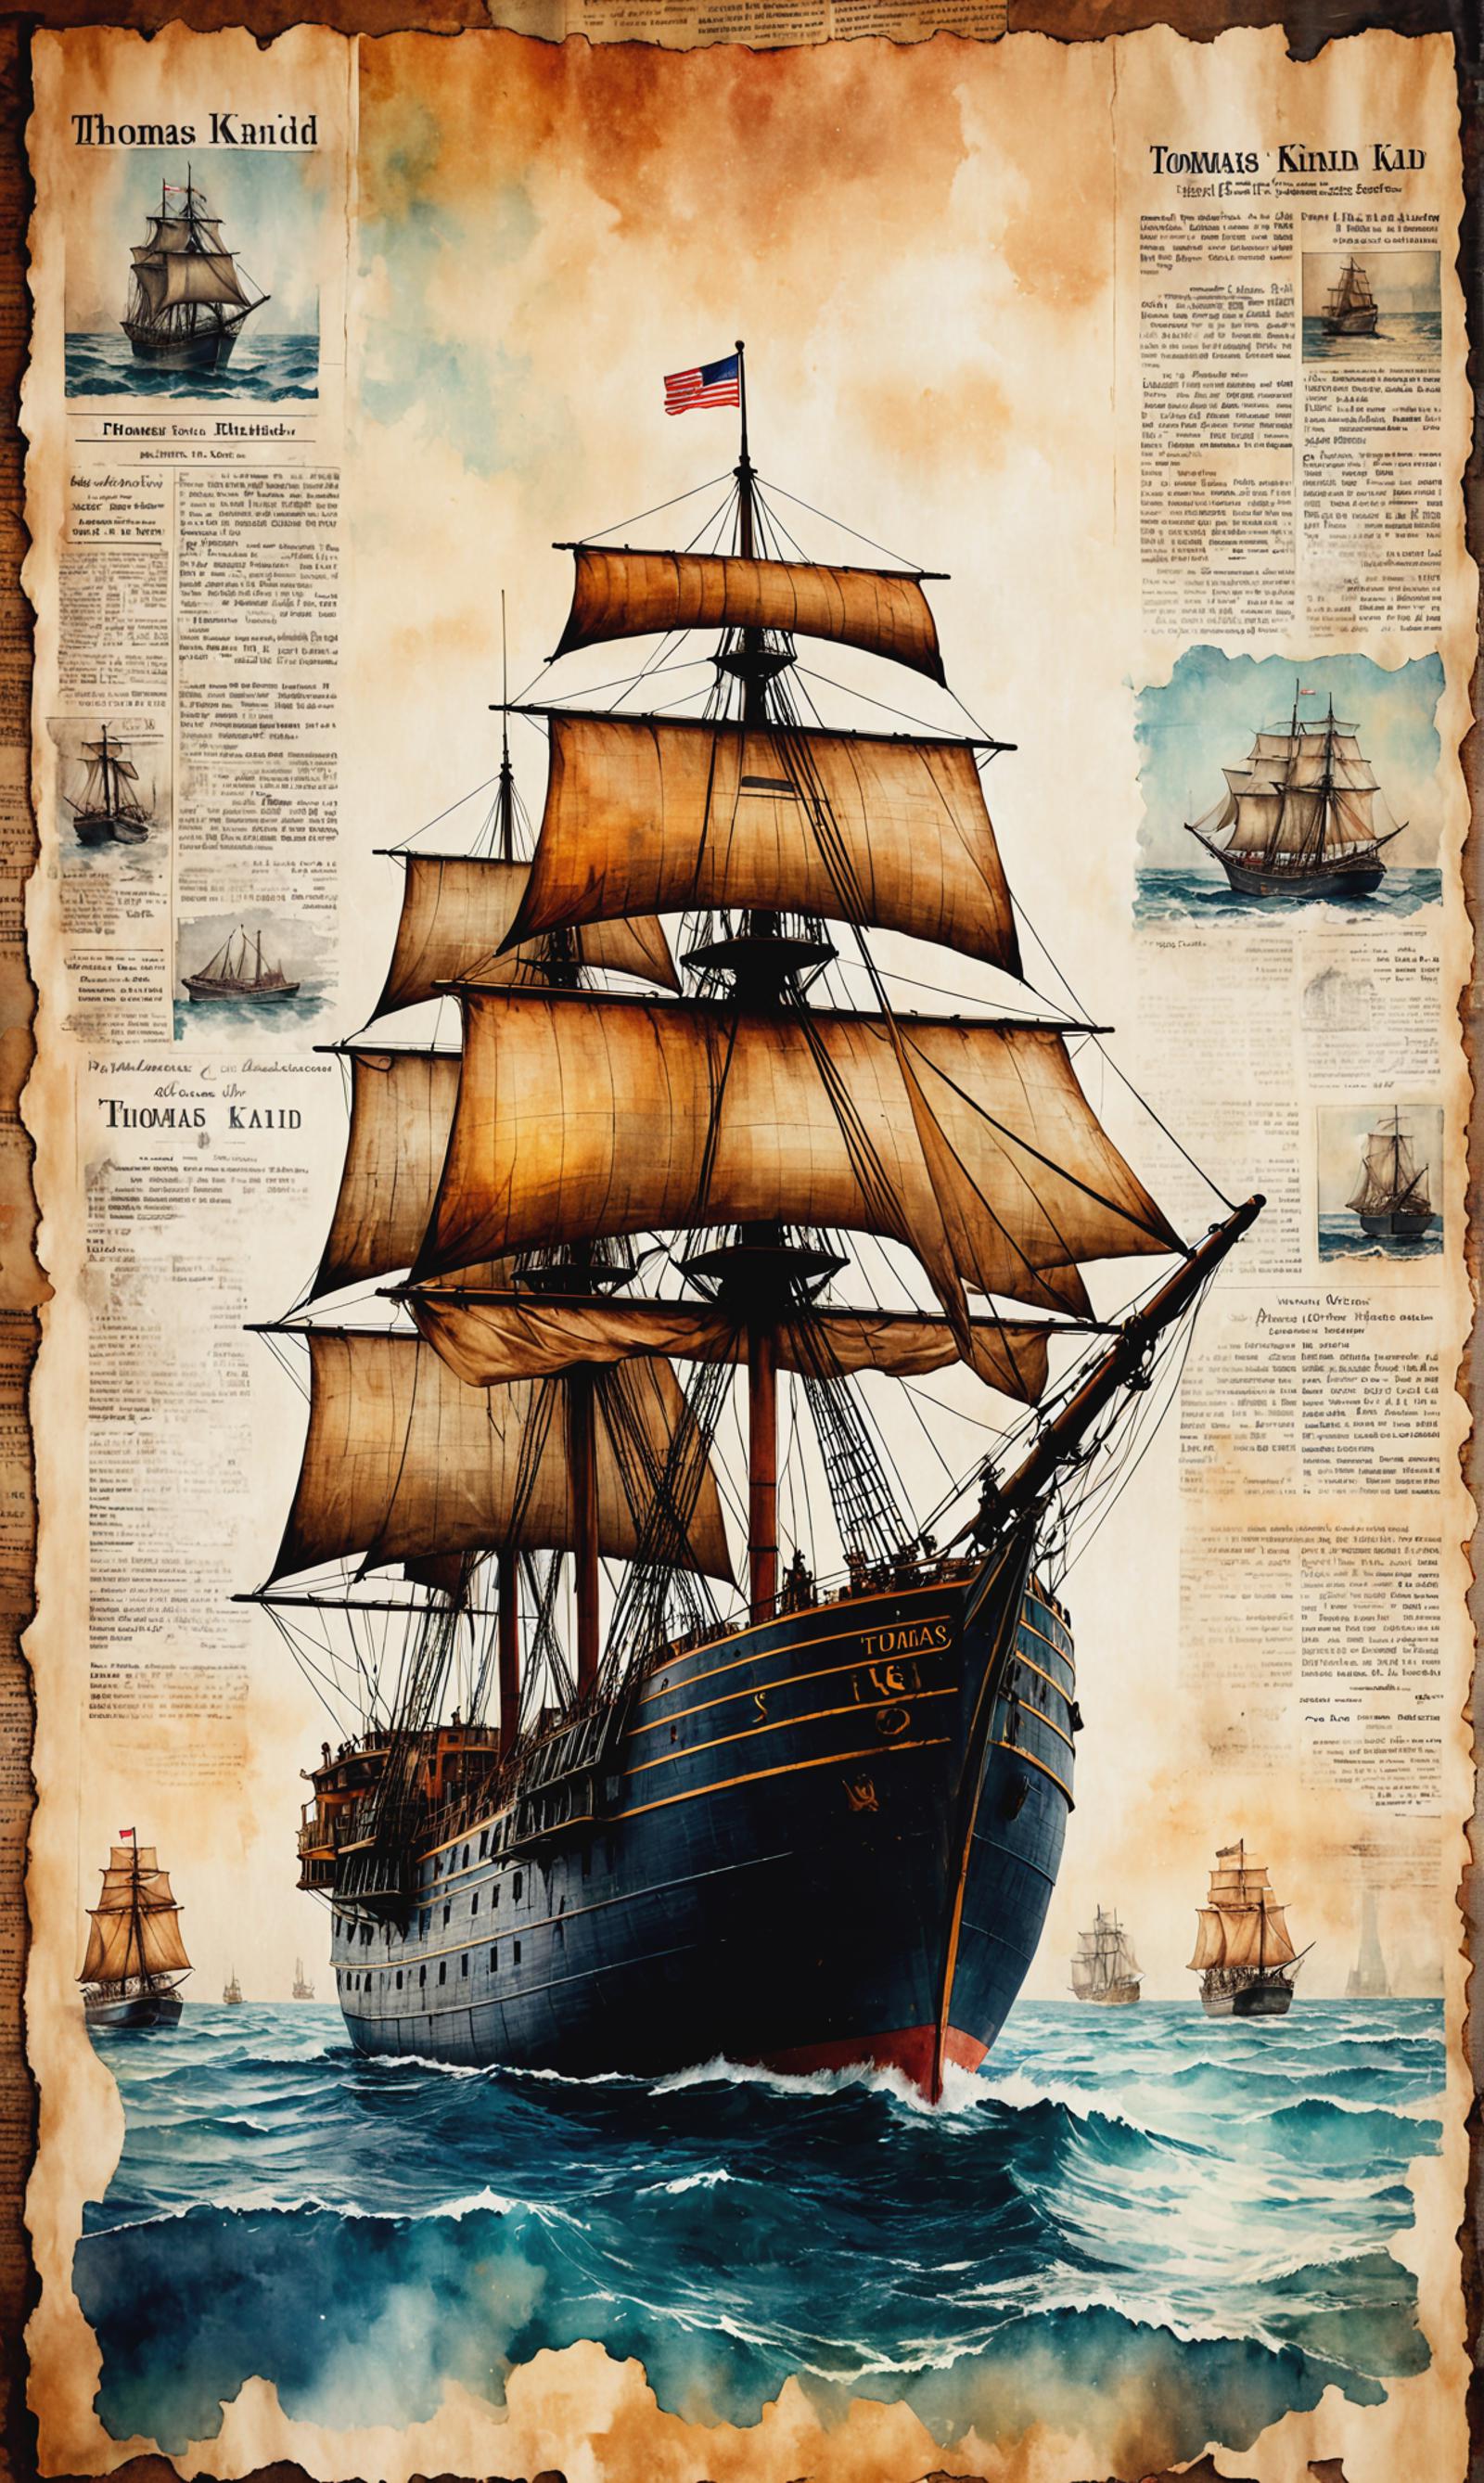 A large, four-masted sailing ship is prominently featured in an old newspaper, with the wind blowing the sails. The ship is the main focus of the image, with a few smaller boats visible in the background. The ship's sails are spread out, showcasing its size and the power of the wind. The image is a combination of a painting and a newspaper illustration, giving it a unique and vintage appearance.